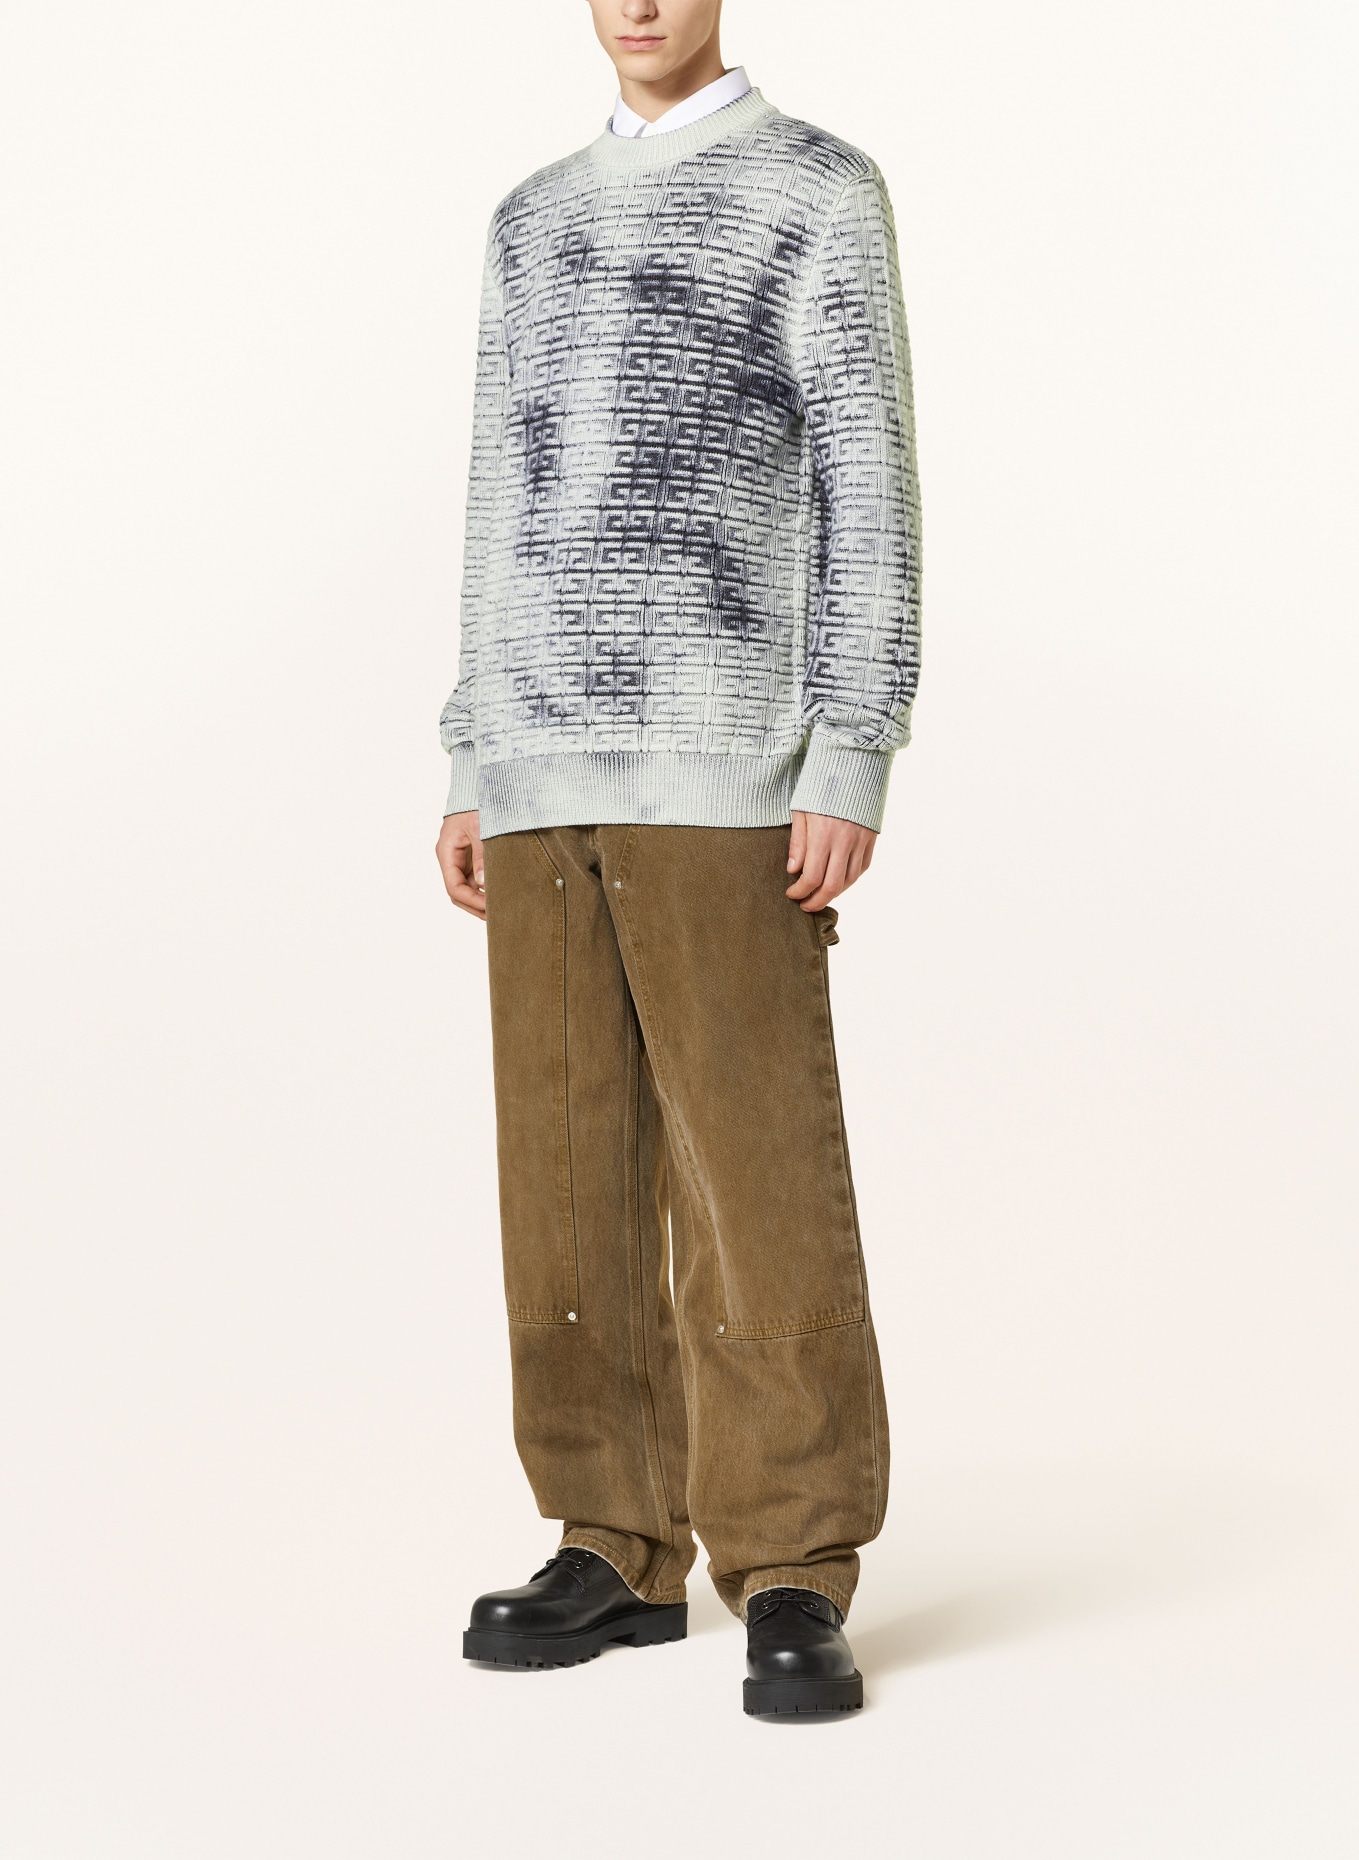 GIVENCHY Pullover, Farbe: WEISS/ DUNKELBLAU (Bild 2)